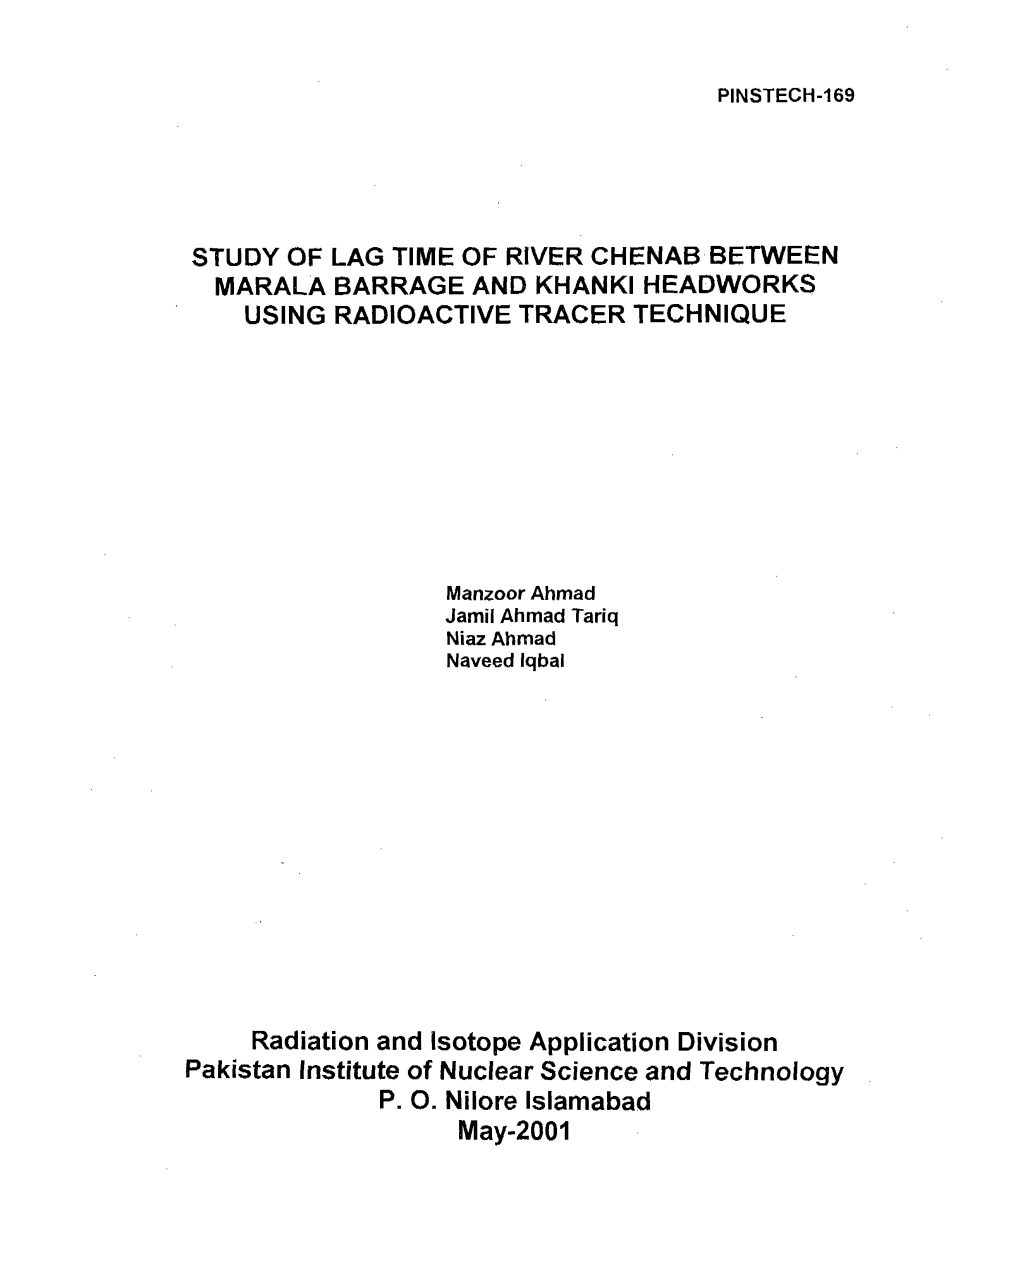 Study of Lag Time of River Chenab Between Marala Barrage and Khanki Headworks Using Radioactive Tracer Technique